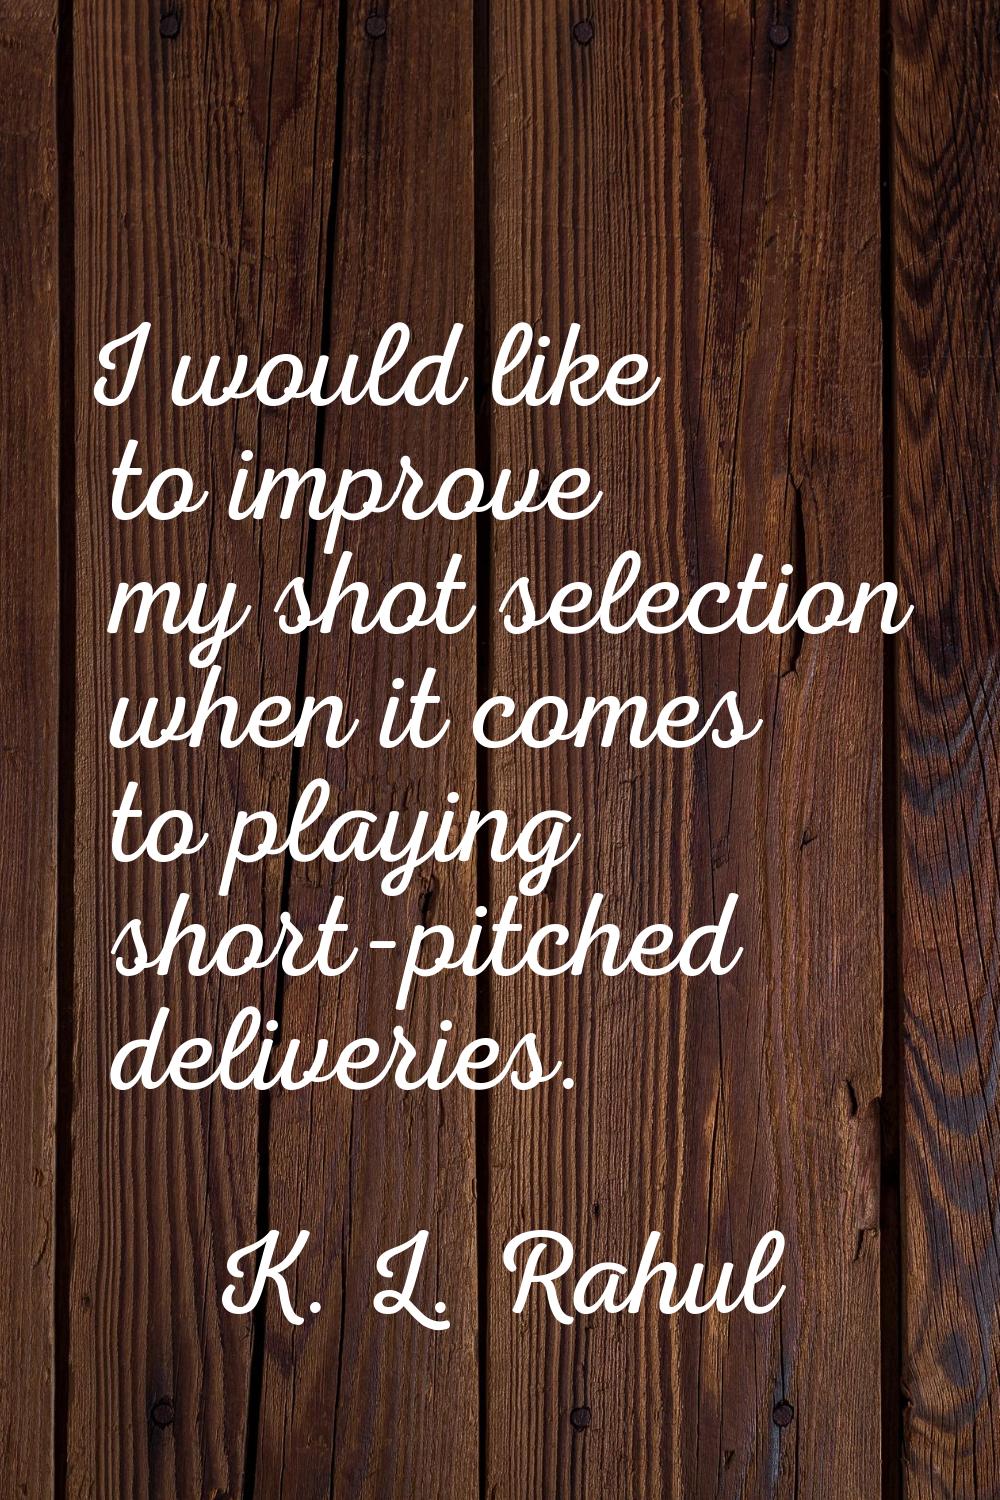 I would like to improve my shot selection when it comes to playing short-pitched deliveries.